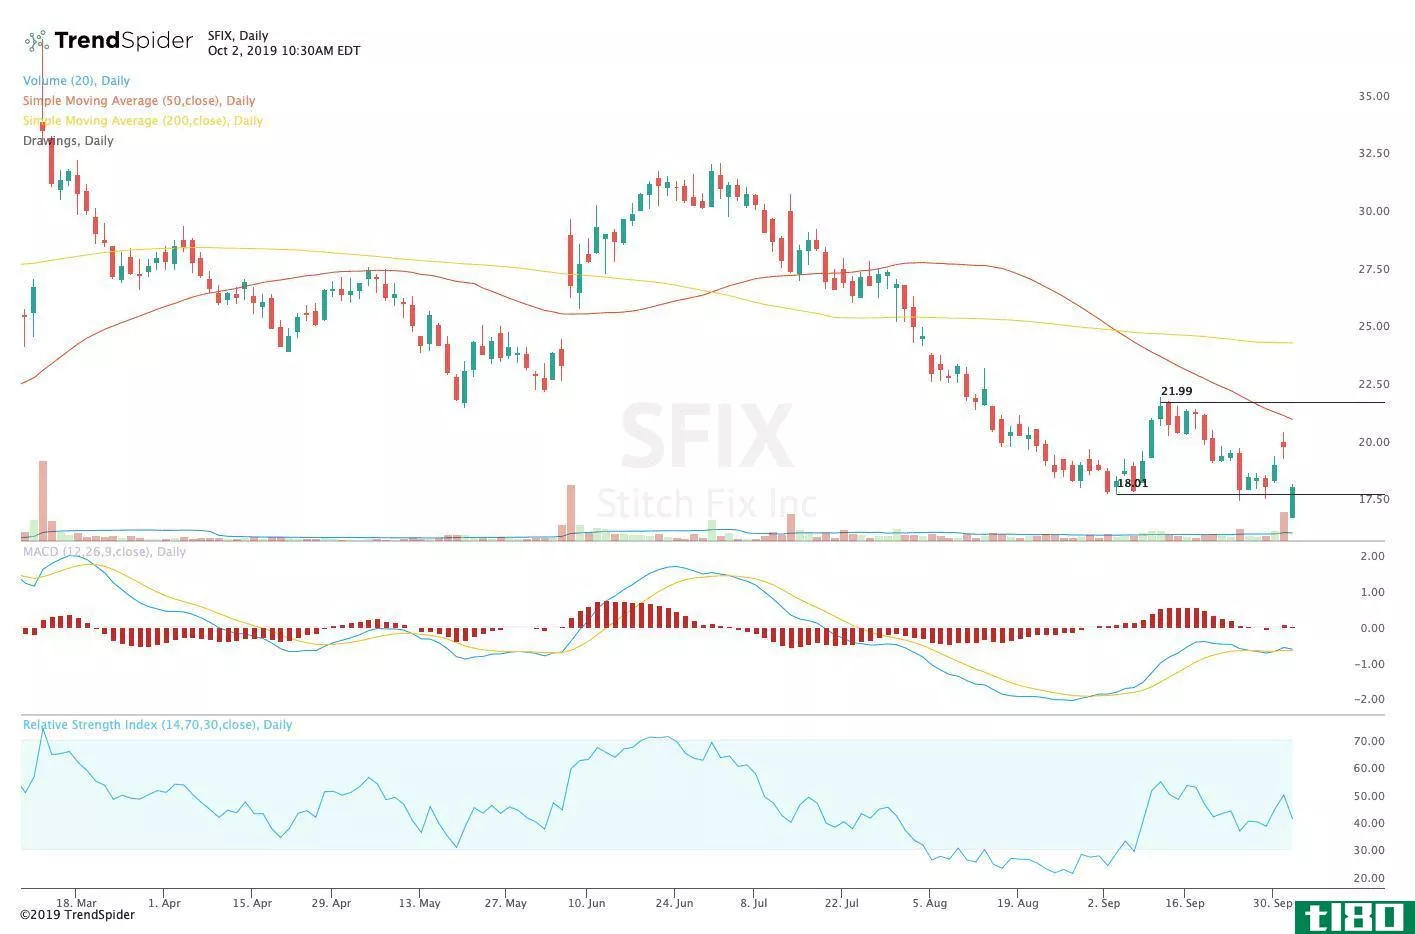 Chart showing the share price performance of Stitch Fix, Inc. (SFIX)